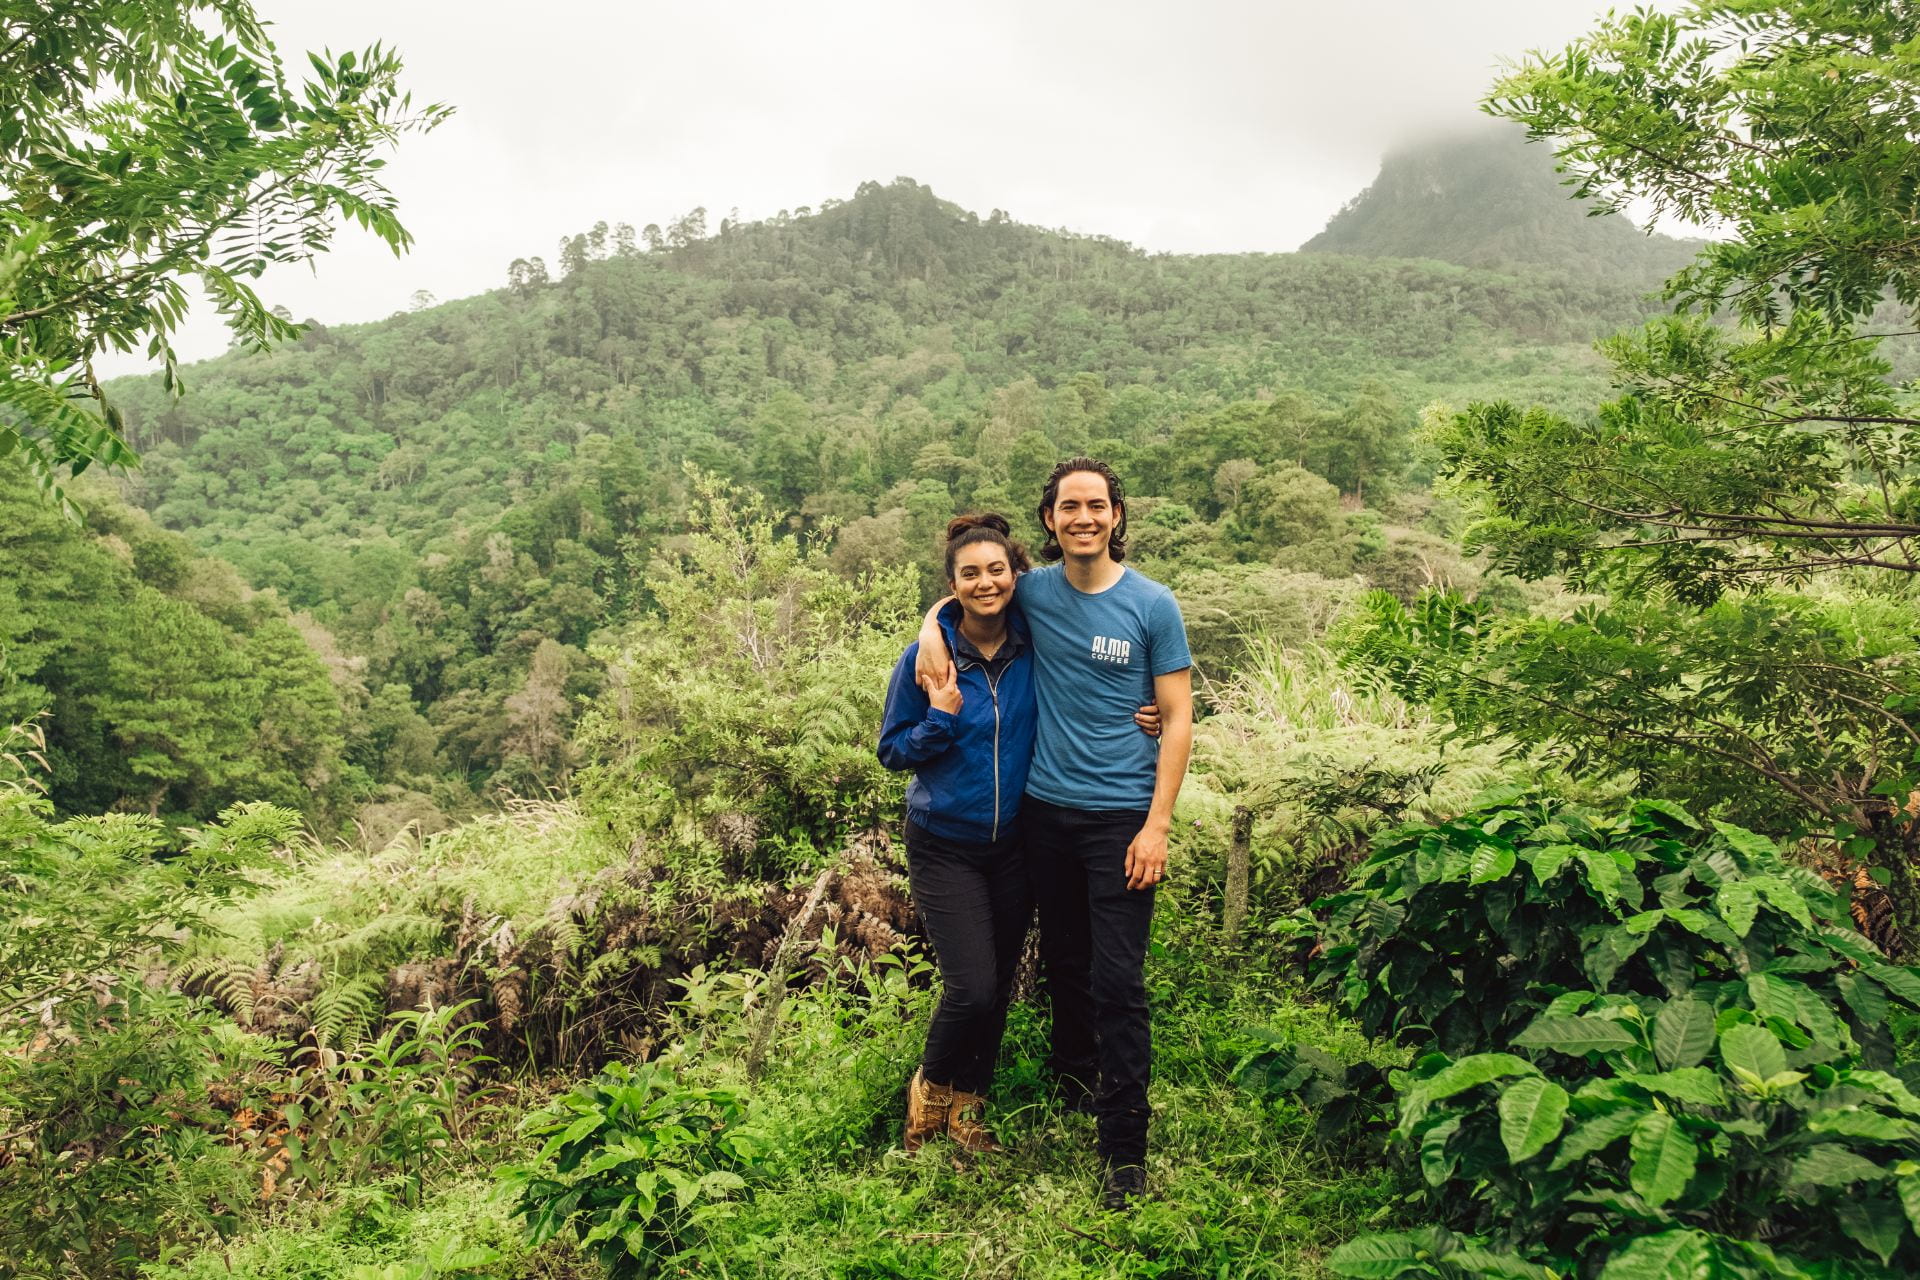 Entrepreneur Leticia Hutchins and her husband and business partner Harry Hutchins visit the family coffee farm in Honduras.